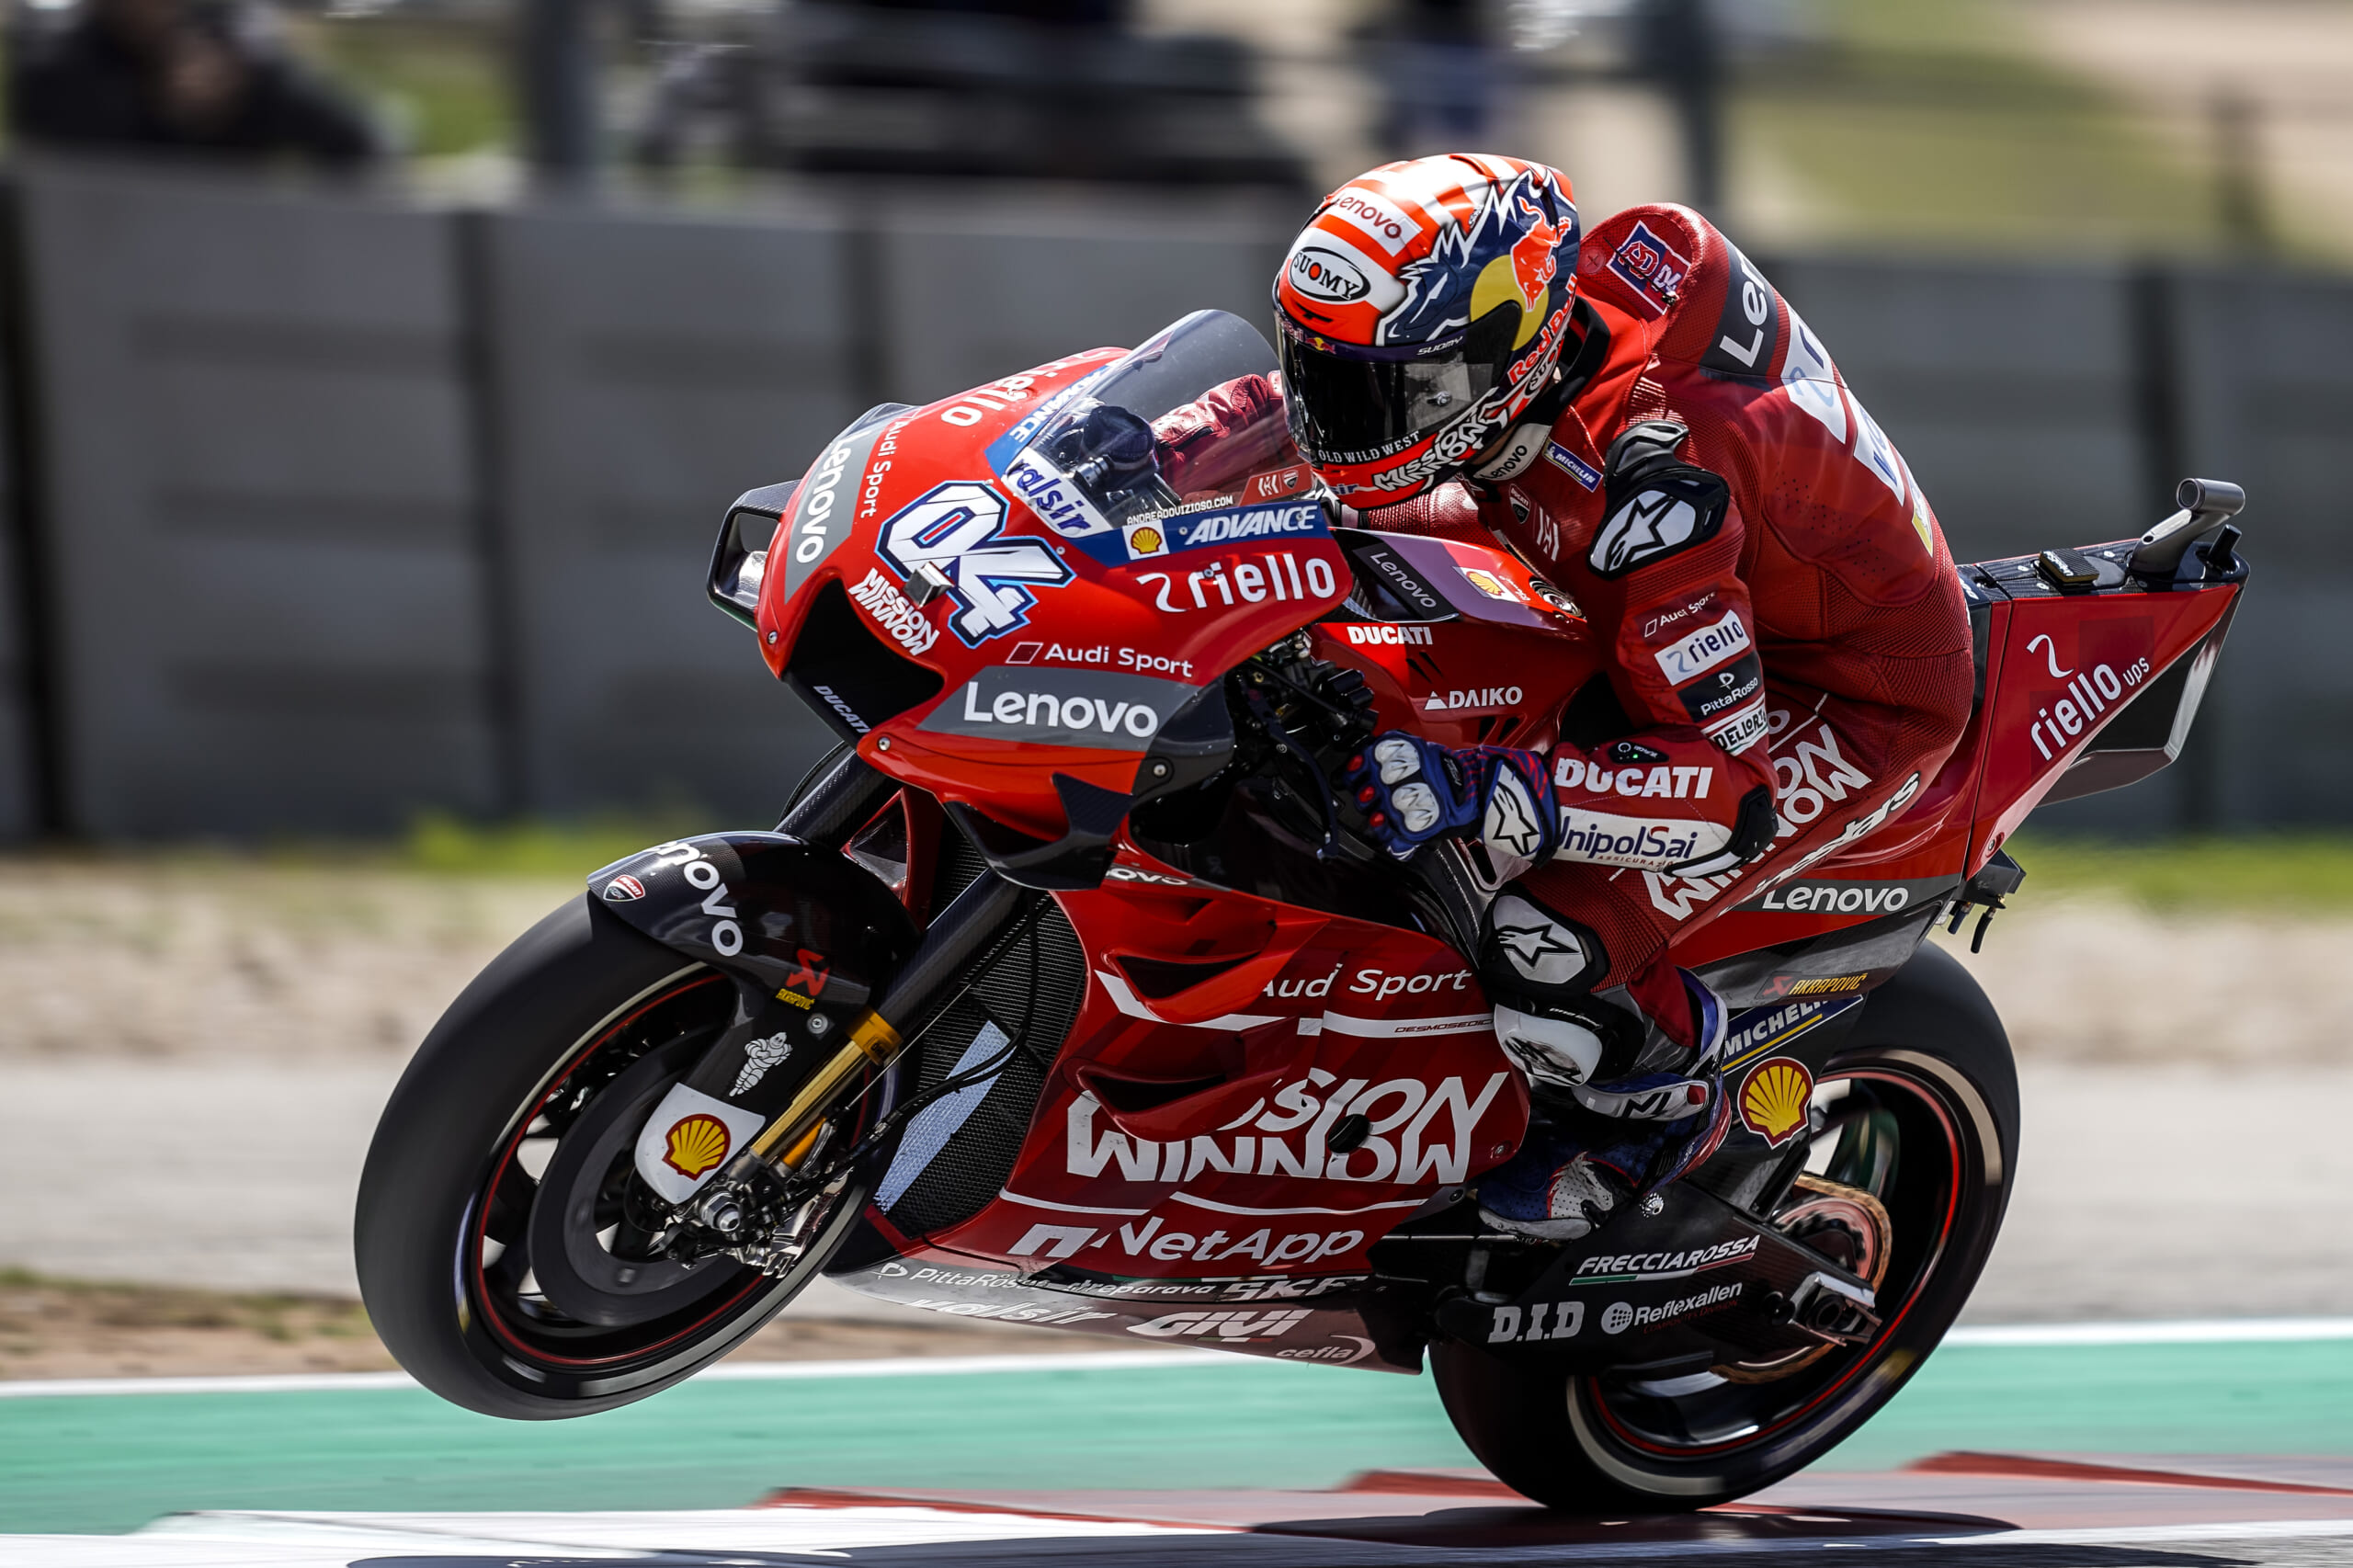 Fearless Motorcycle Racers Hit 220 MPH Speeds At Americas Ultimate MotoGP Contest